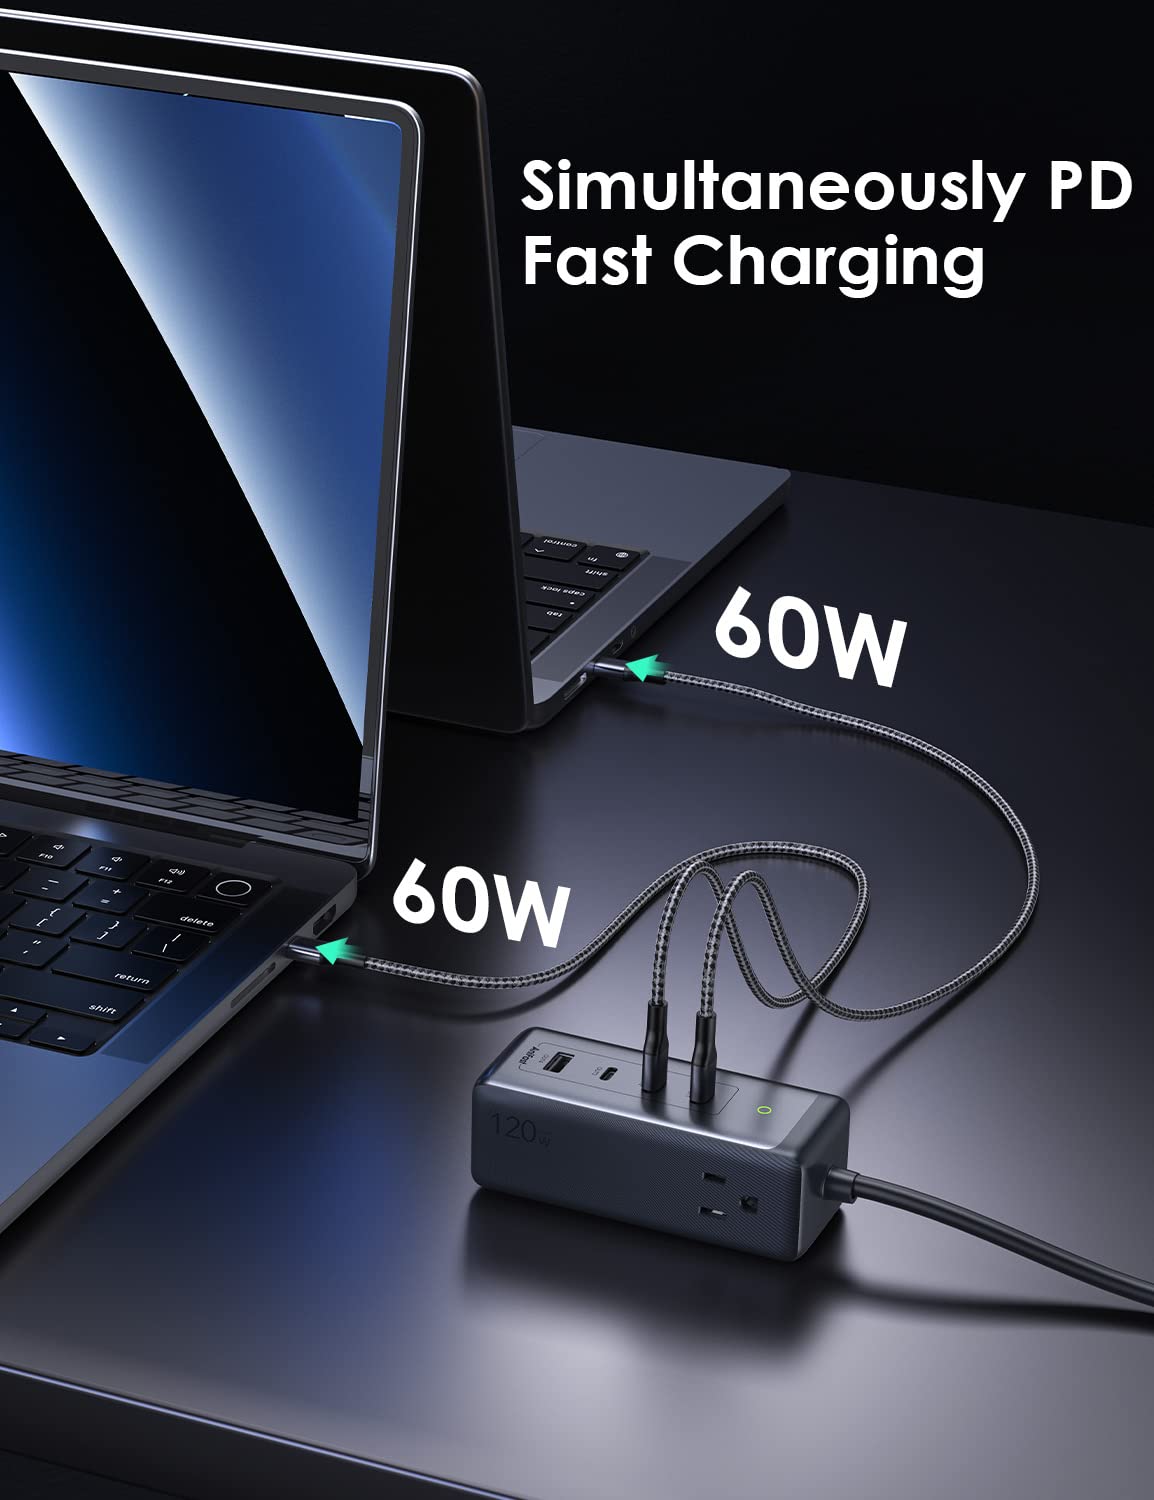 120W USB C Charging Station with 2AC Outlets, oraimo GaN Charger, PPS, Fast Charger, USB C Wall Charger for MacBook, iPhone, Ipad, Samsung (100W USB C Cable Included)